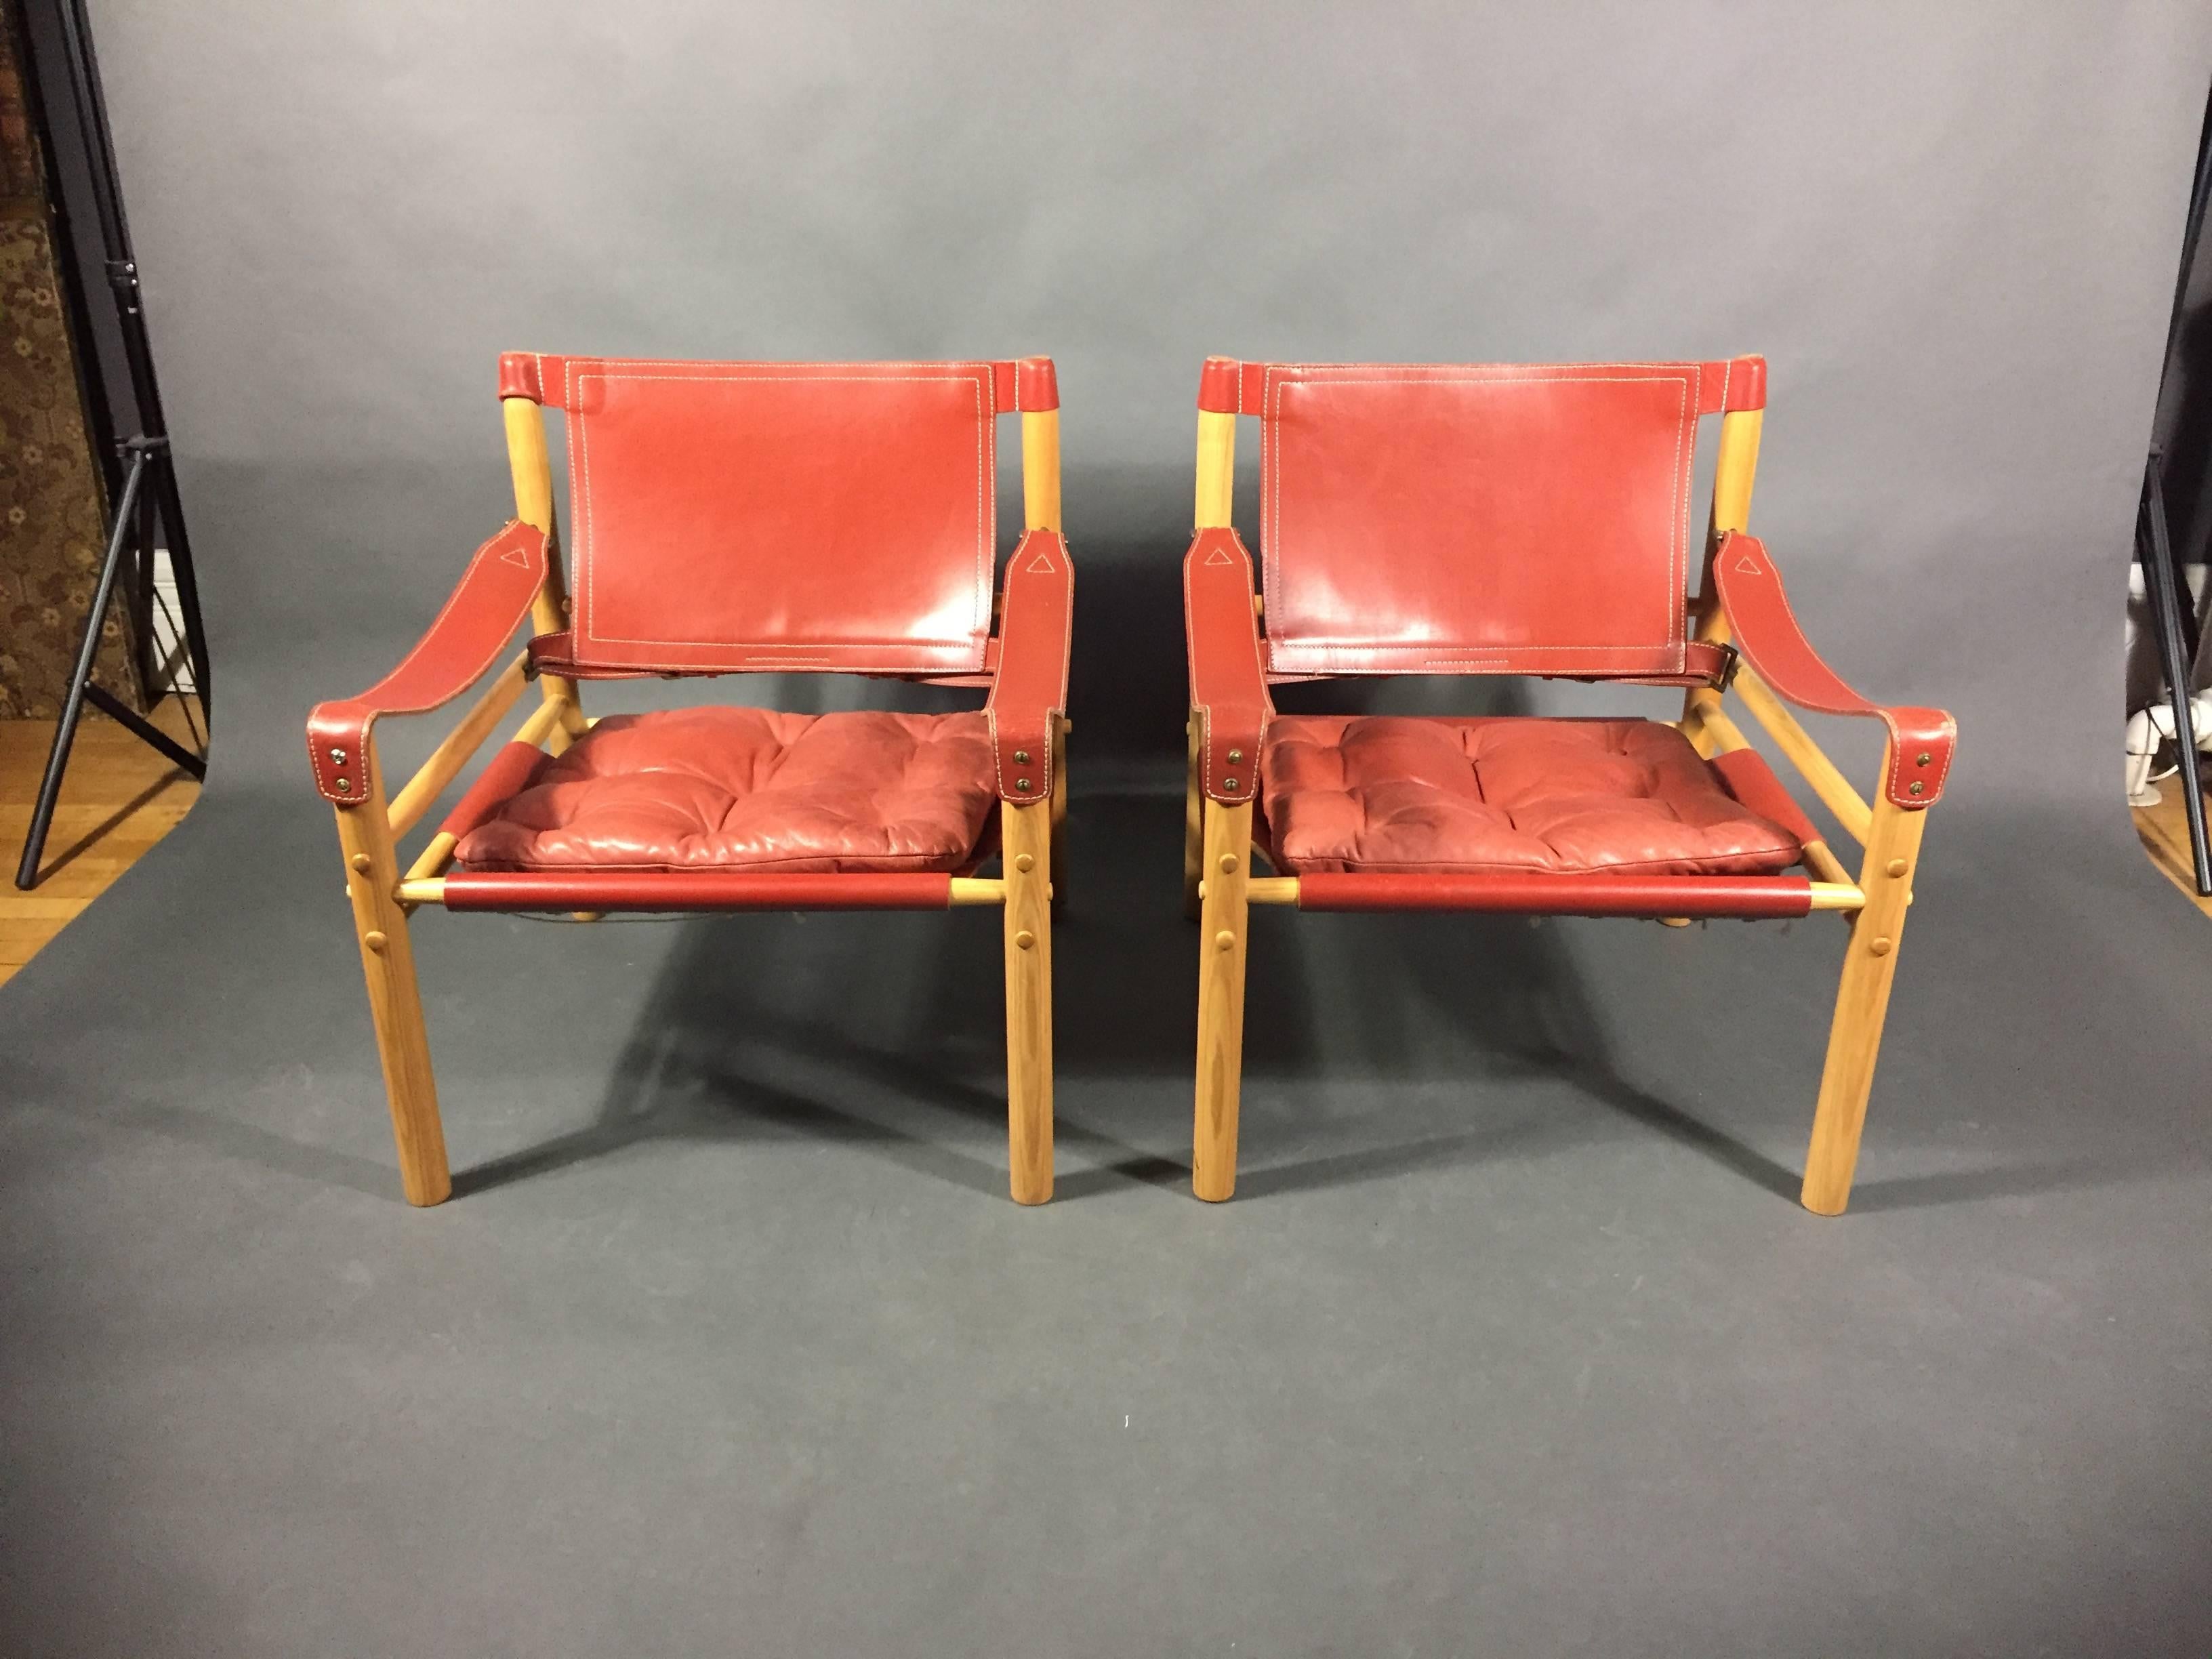 Scandinavian Modern Pair of Arne Norell Red or Orange Leather Sirocco Chairs, Sweden For Sale